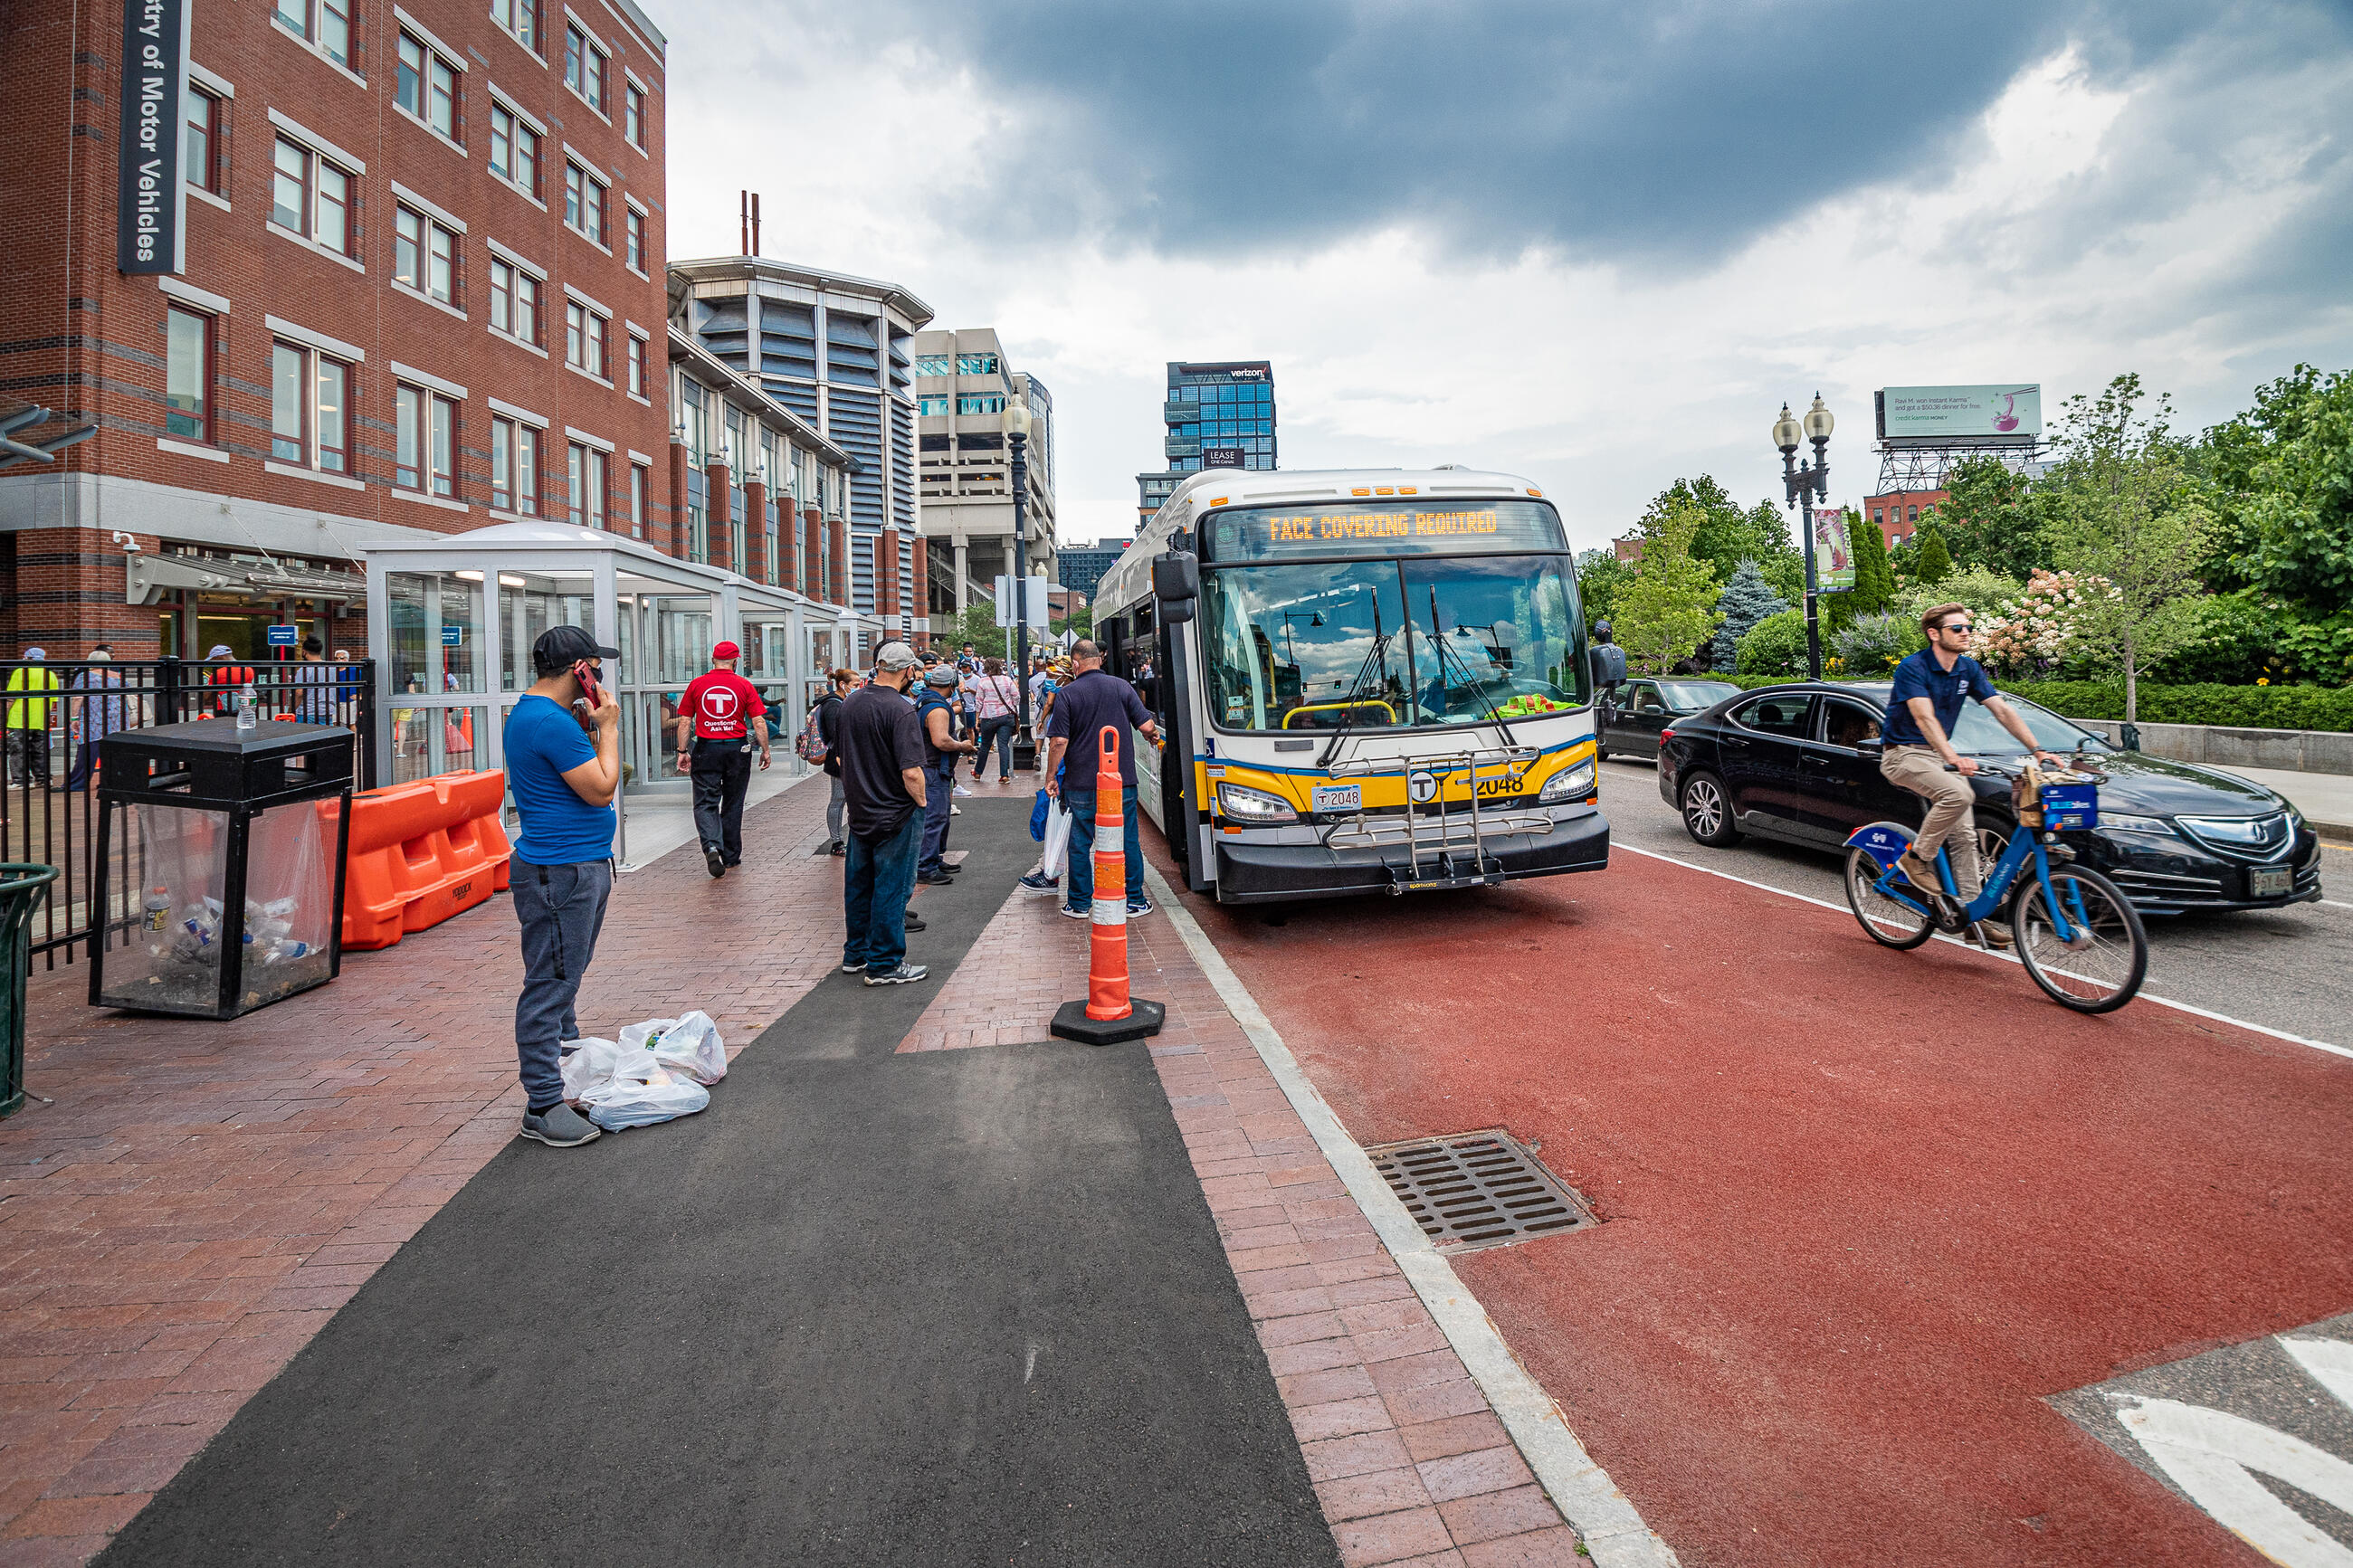 Riders wait in line to board a bus in front of a brick building labeled Registry of Motor Vehicles. The bus, which has a sign spelling out FACE COVERING REQUIRED displayed, is at a Haymarket Station bus stop on Surface Street. Cars and a bicyclist pass to the right of the bus.